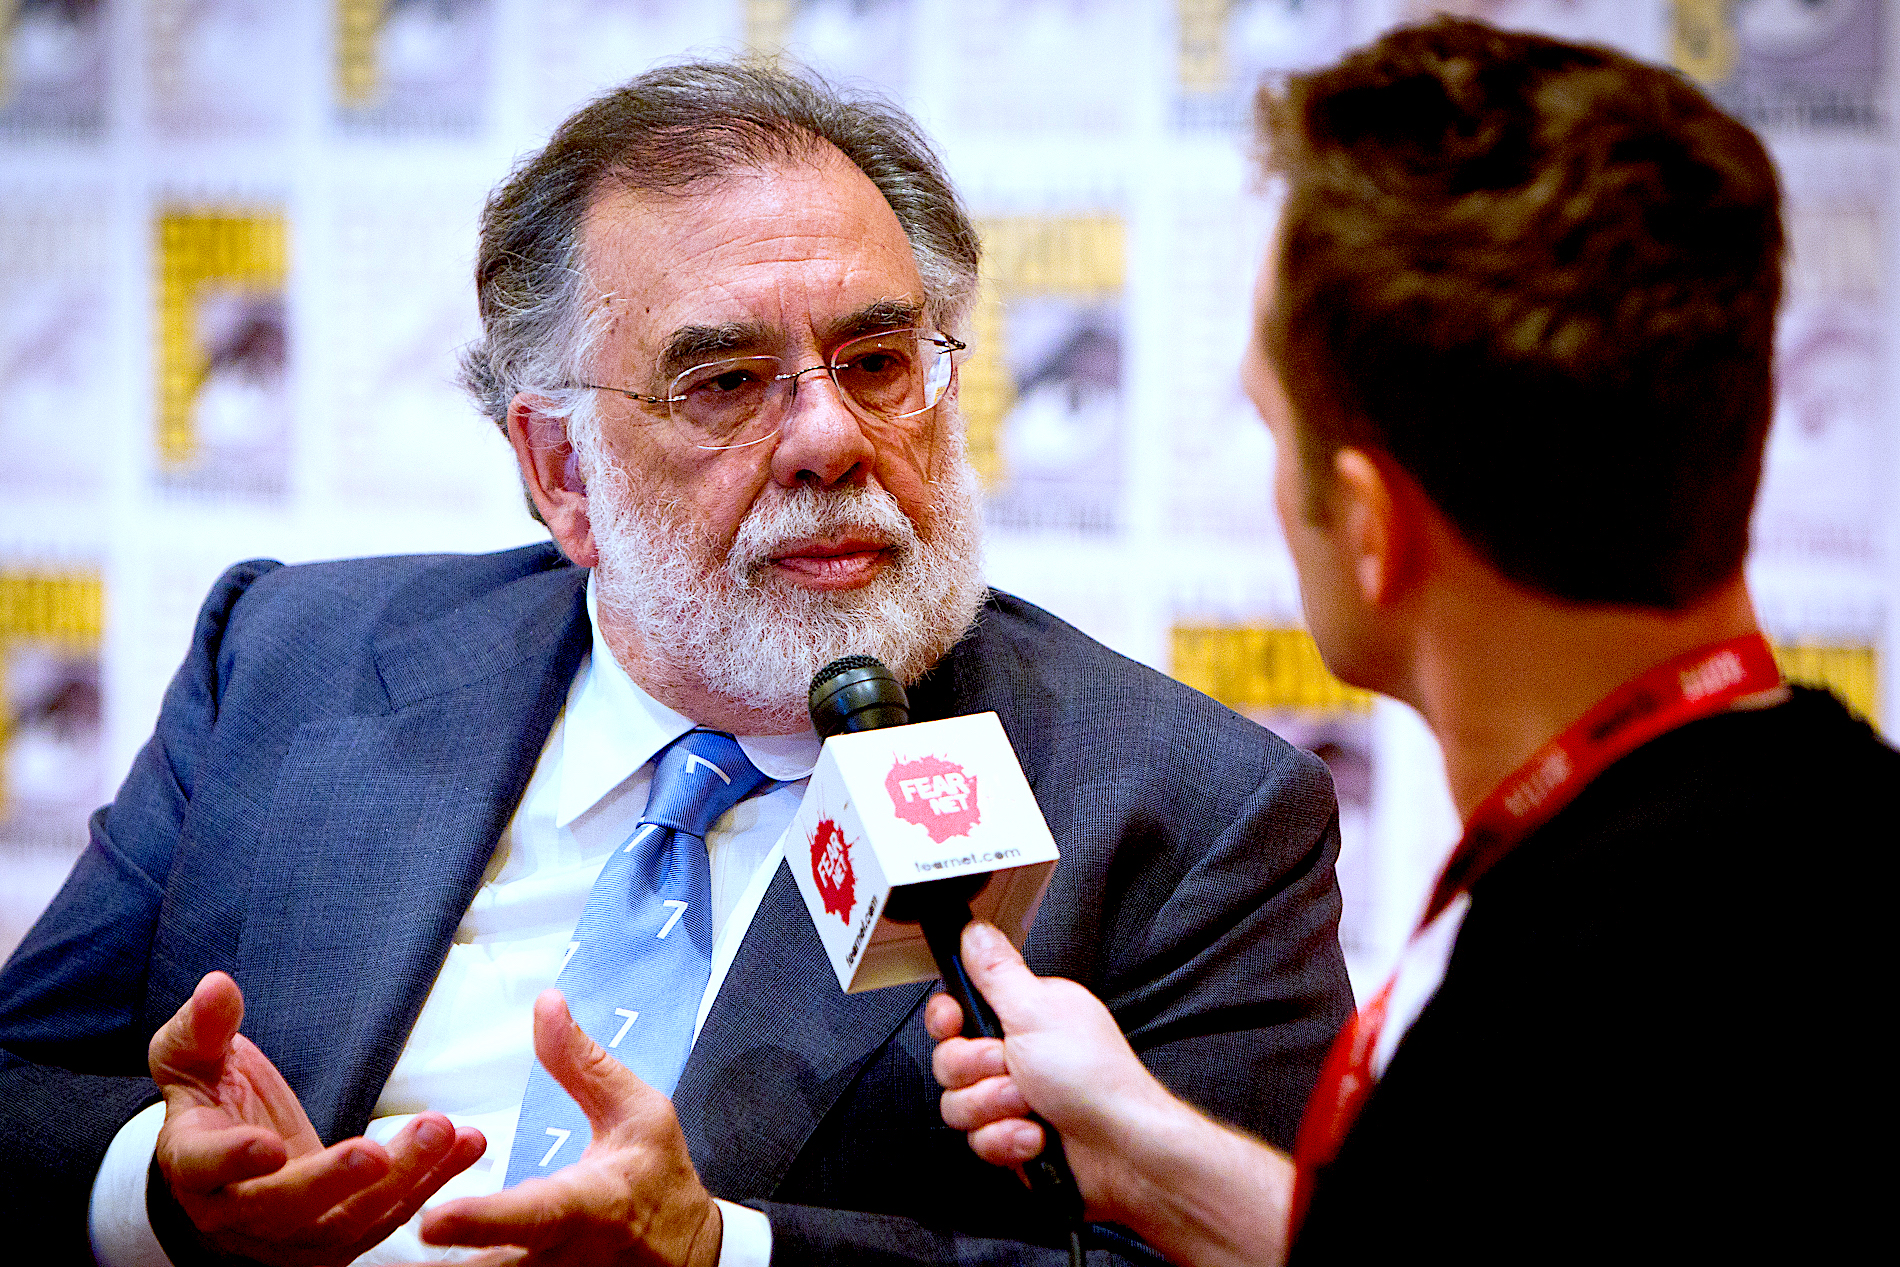 Francis Ford Coppola in 2011. Photo: Gerald Geronimo/Wikimedia Commons, CC BY-SA 2.0. 